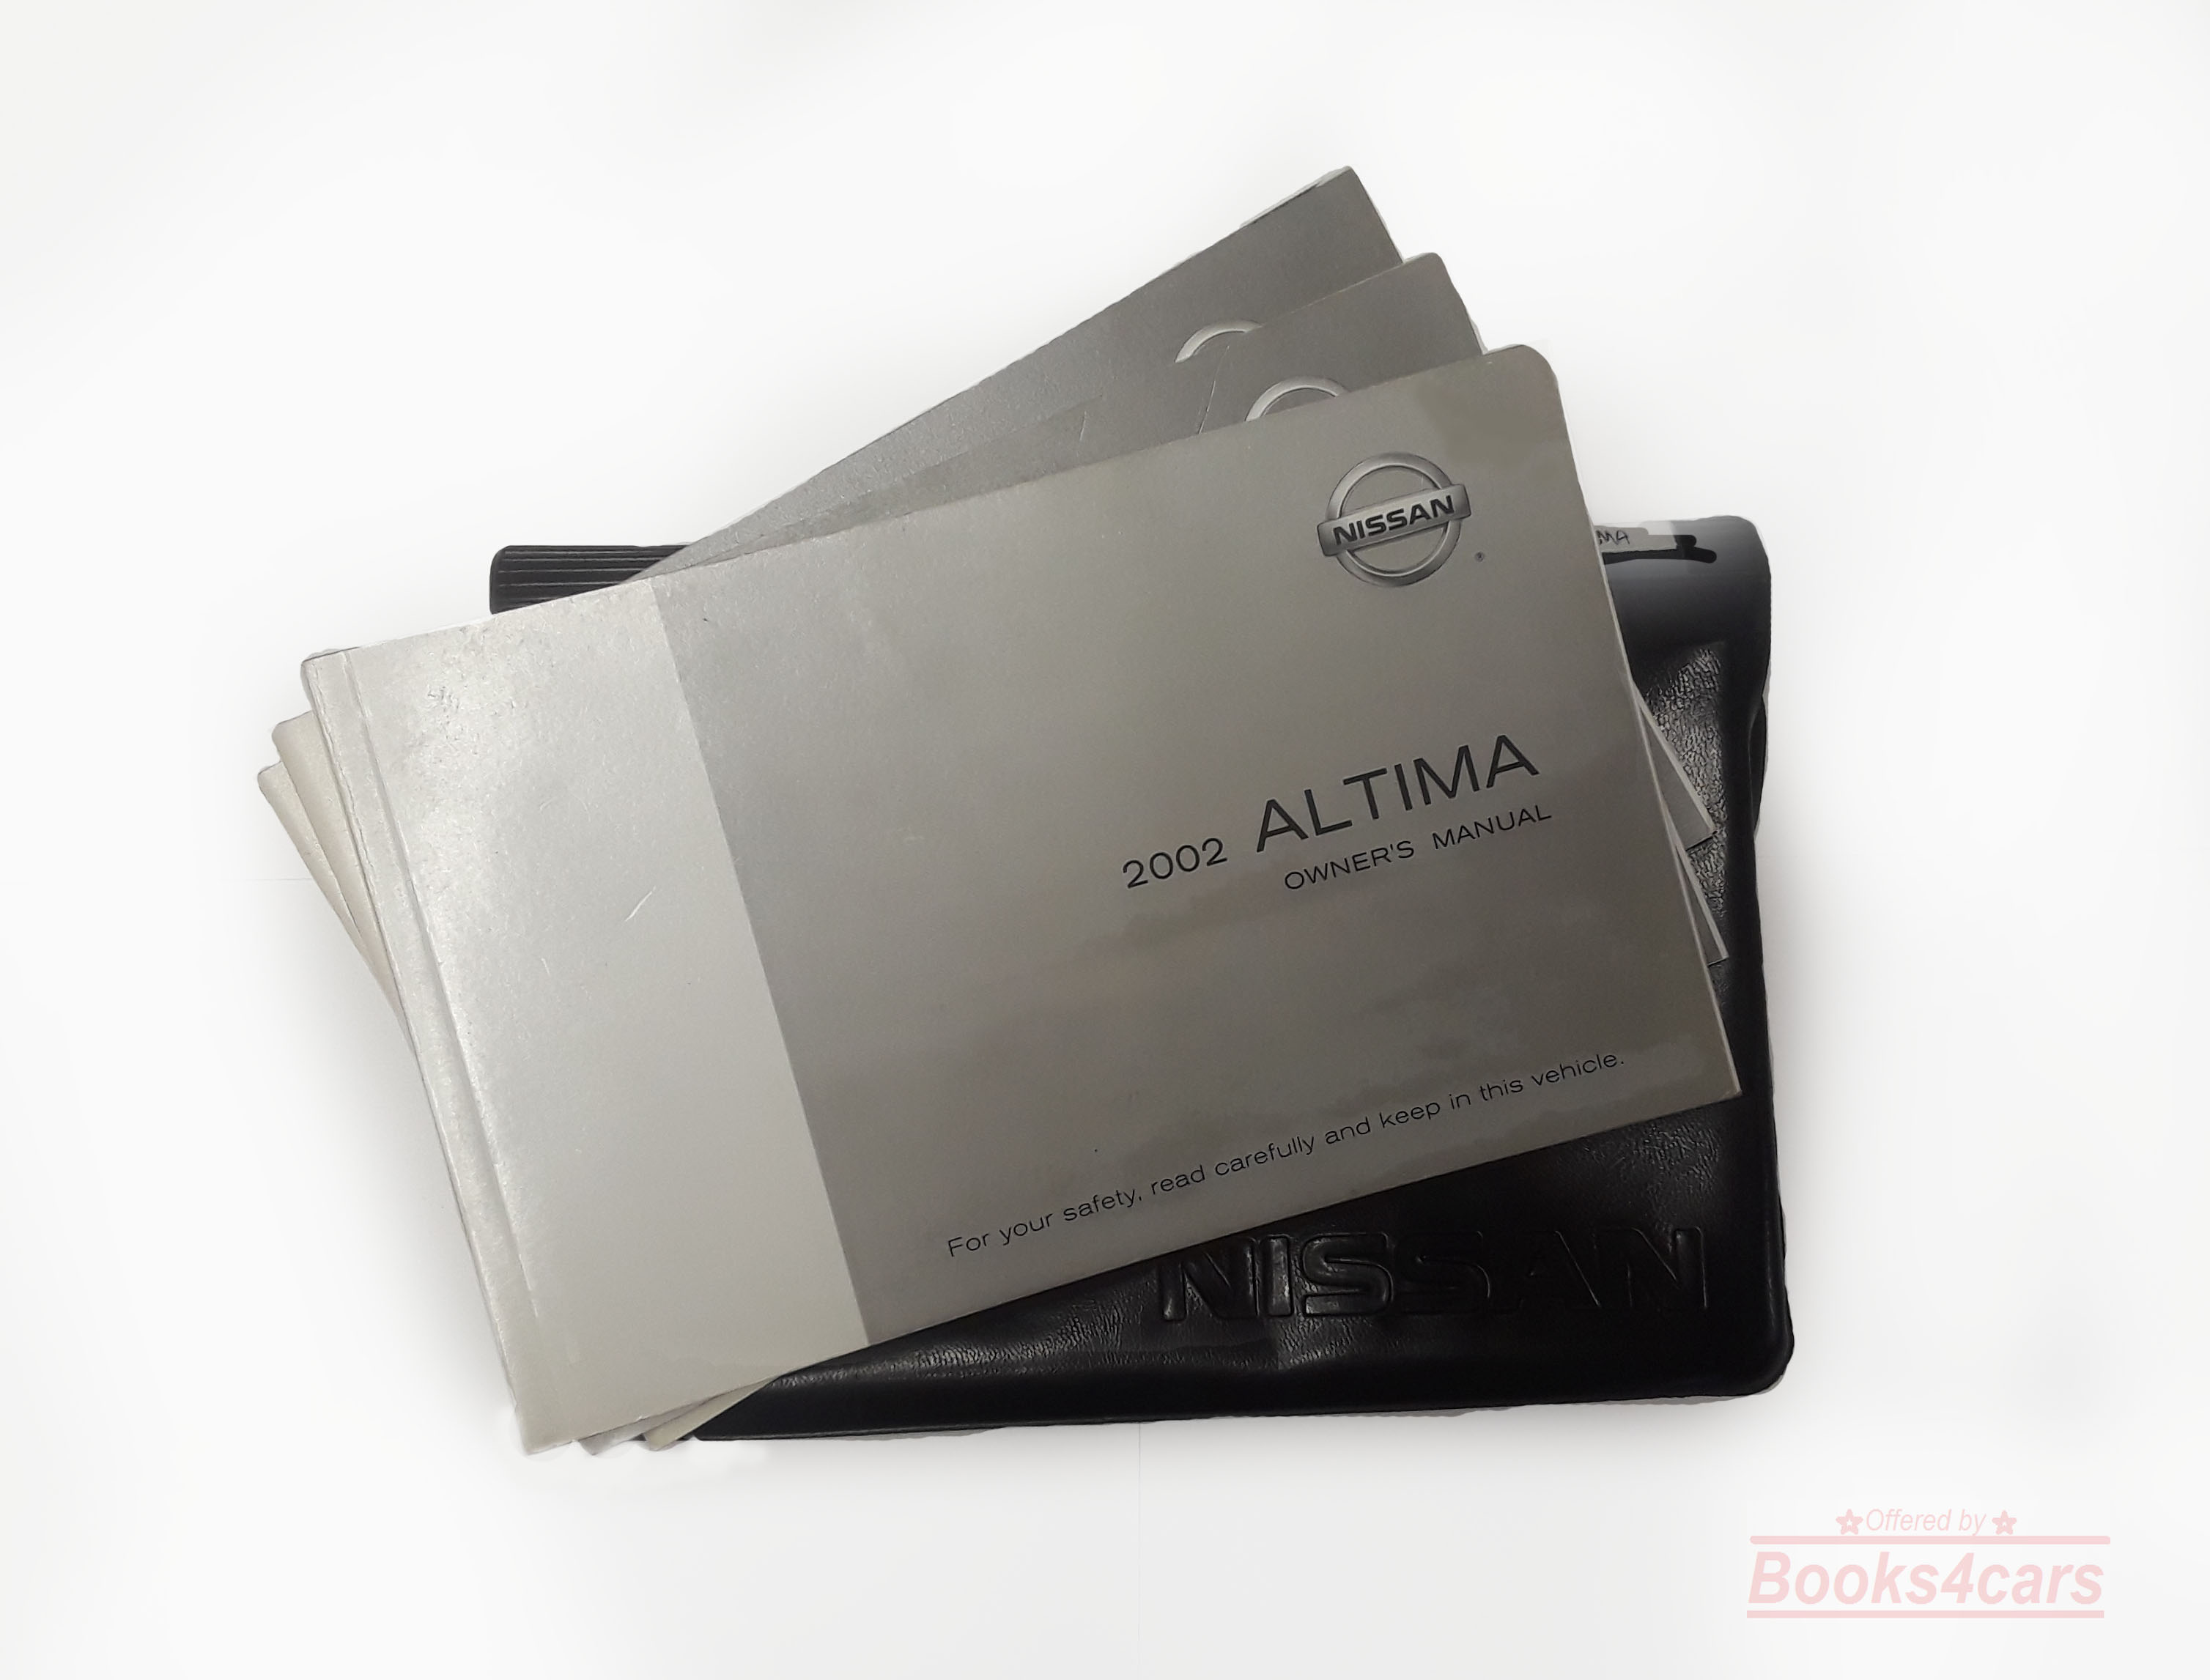 2002 Altima Owners Manual by Nissan